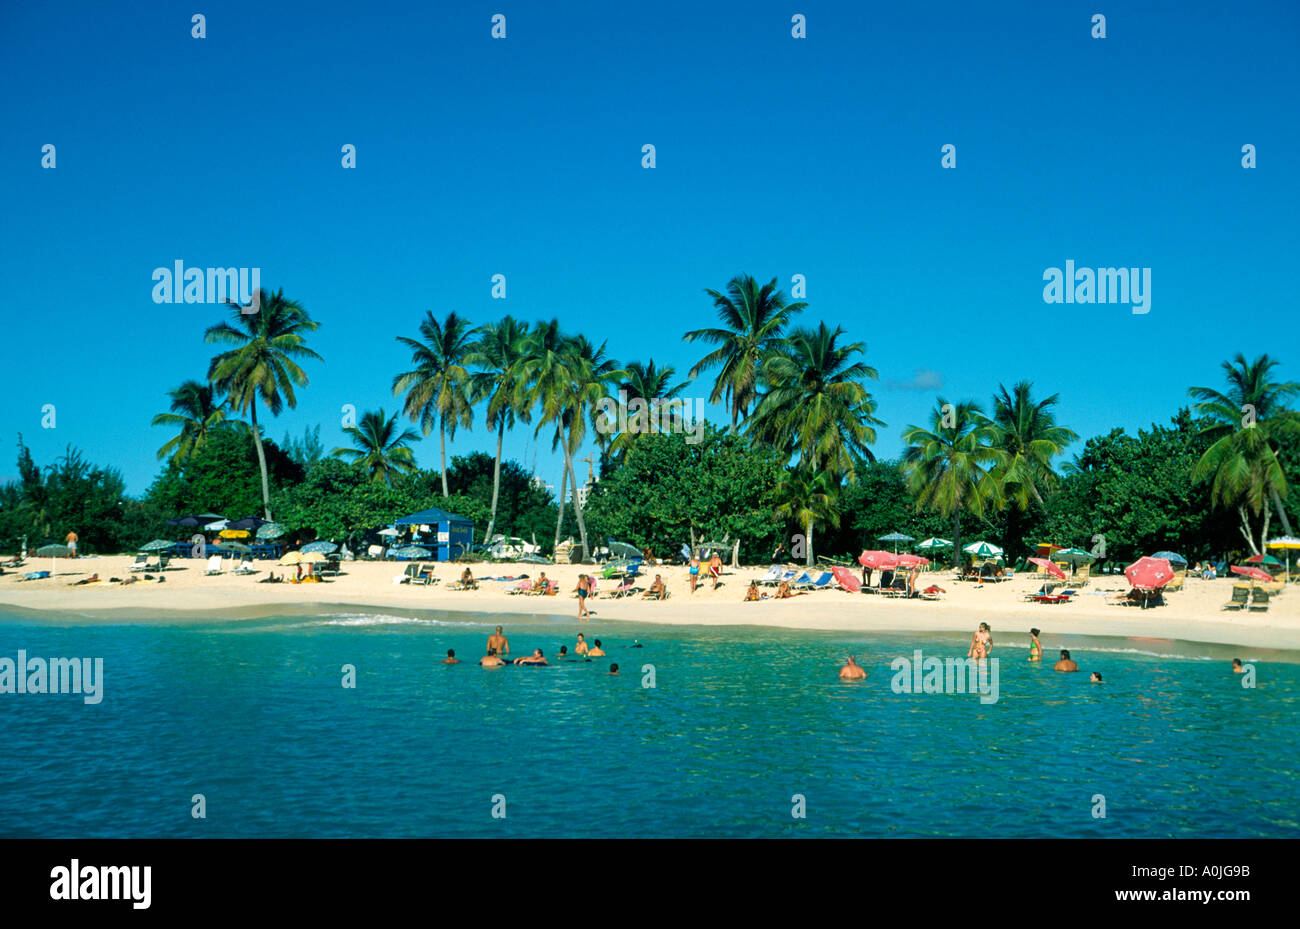 Marigot Saint Martin French West Indies Mullet bay beach people Stock Photo